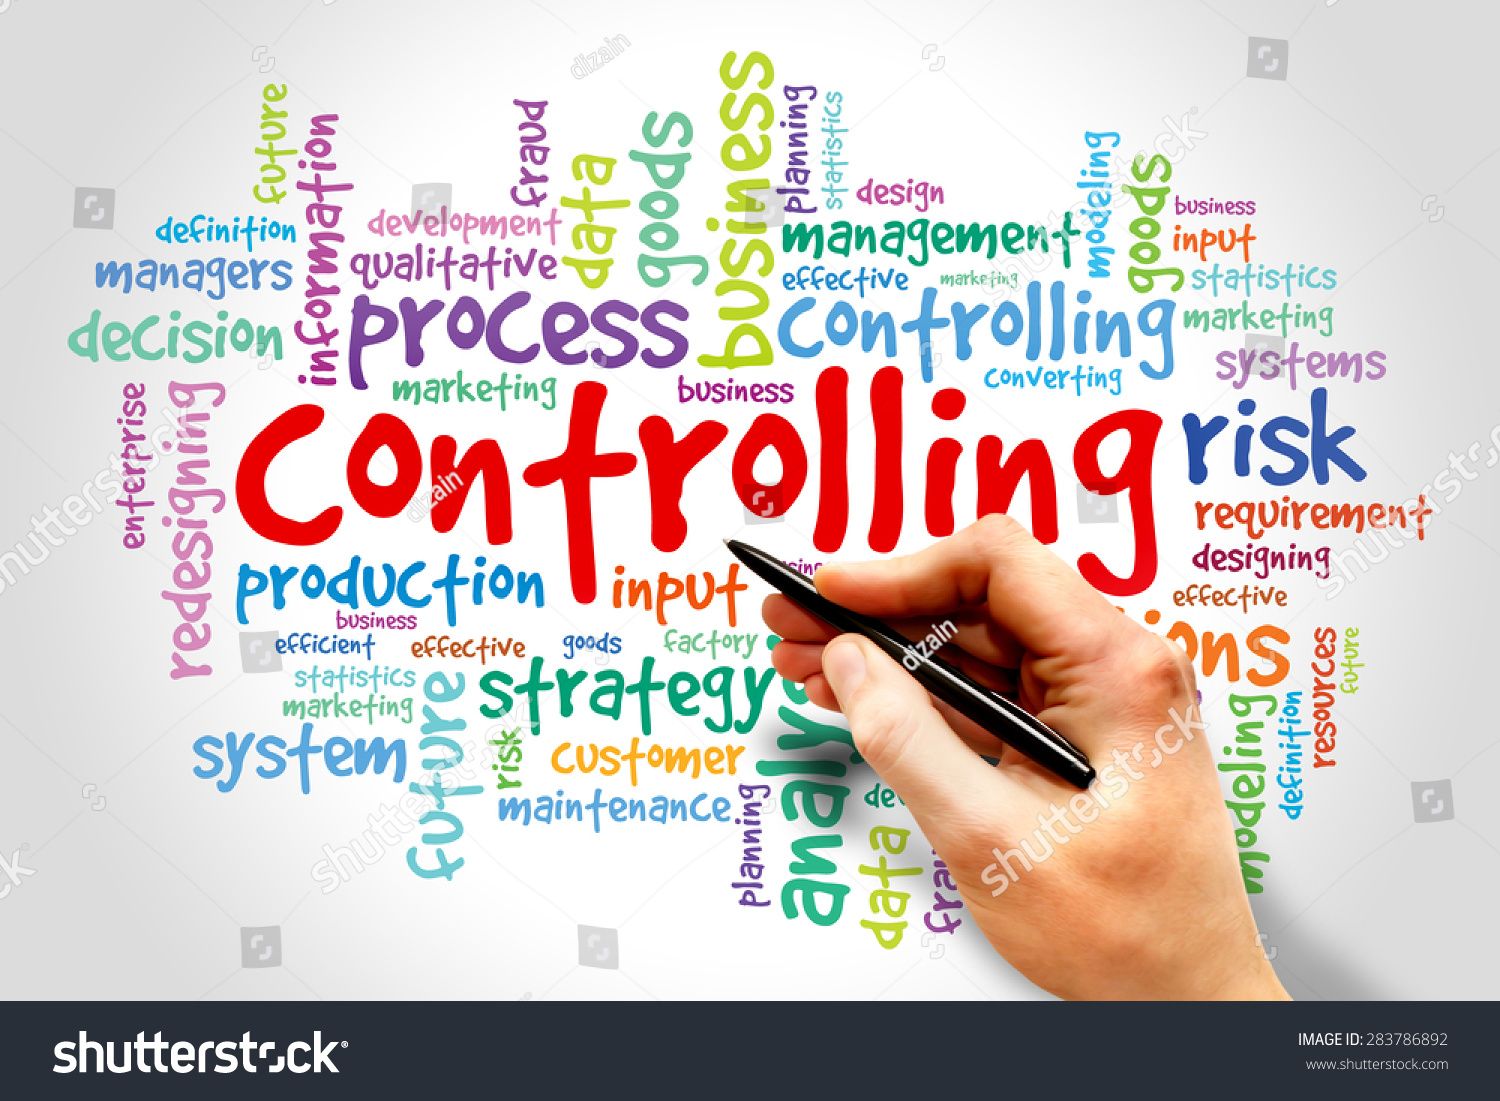 Controlling word cloud, business concept